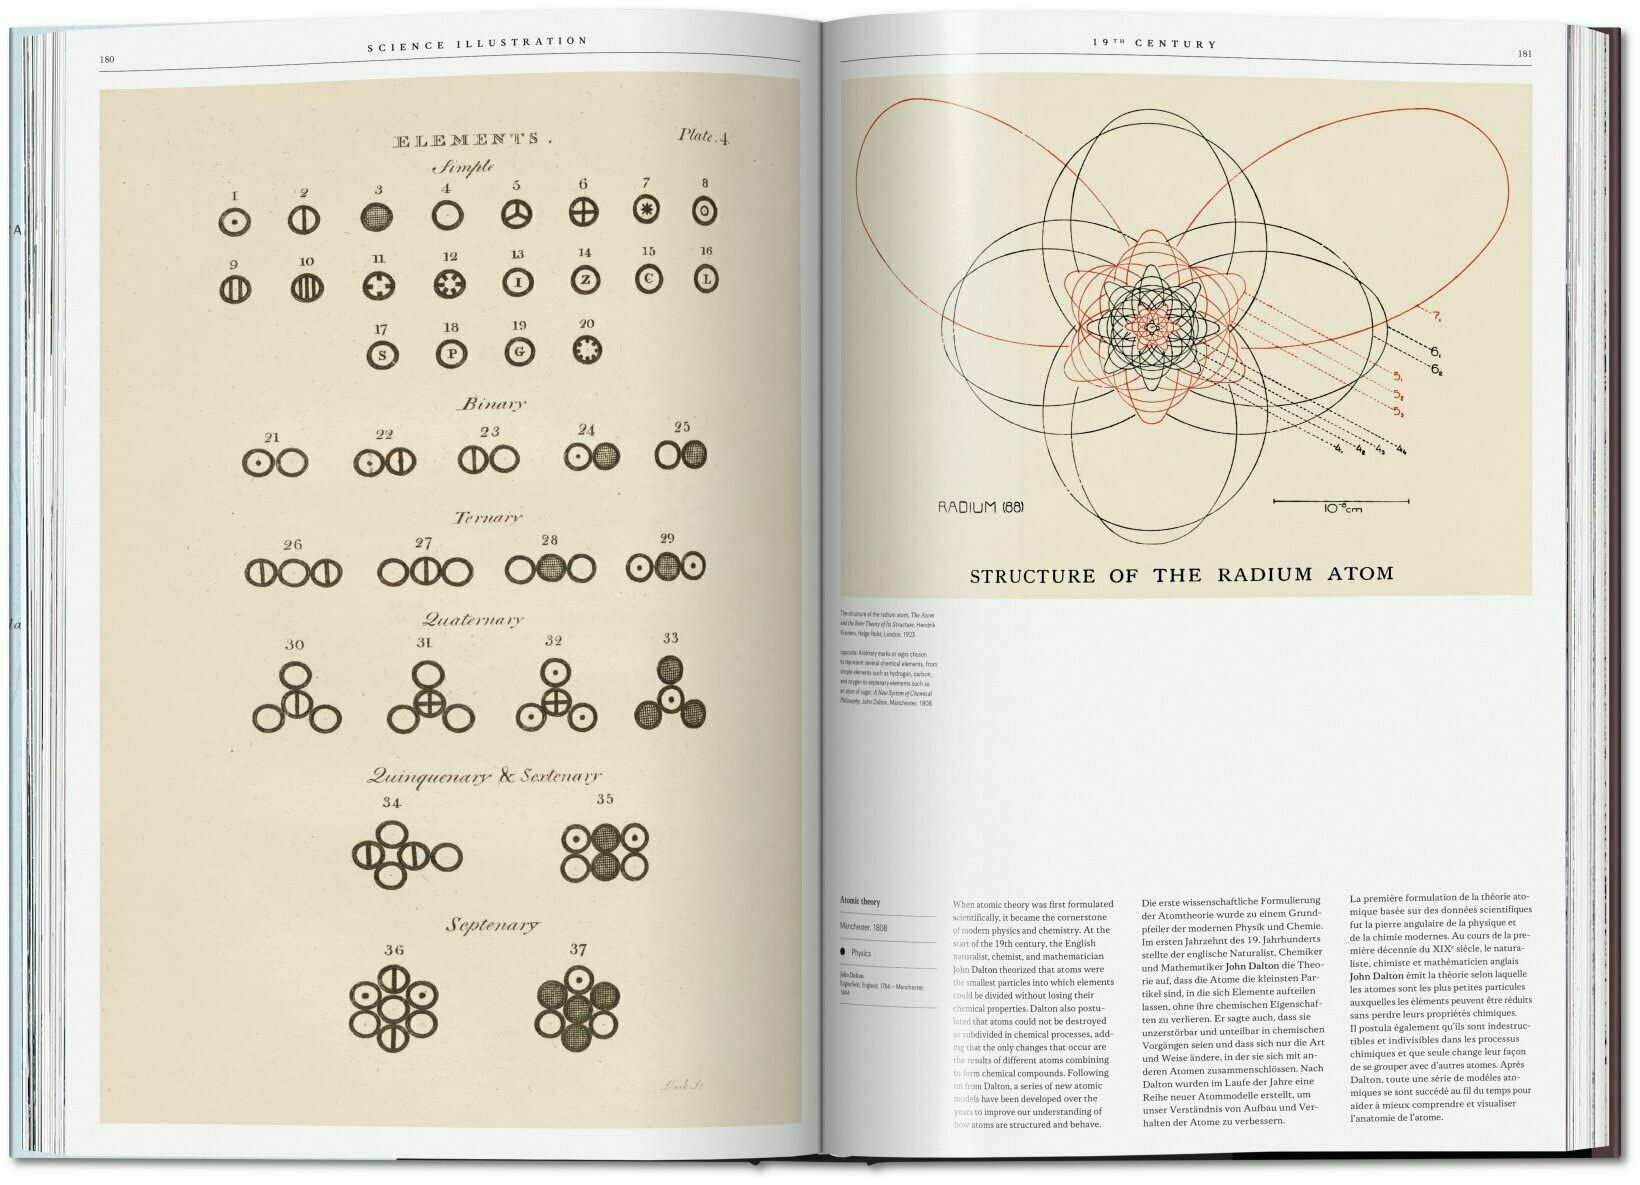  Science Illustration. A History of Visual Knowledge from the 15th Century to Today 